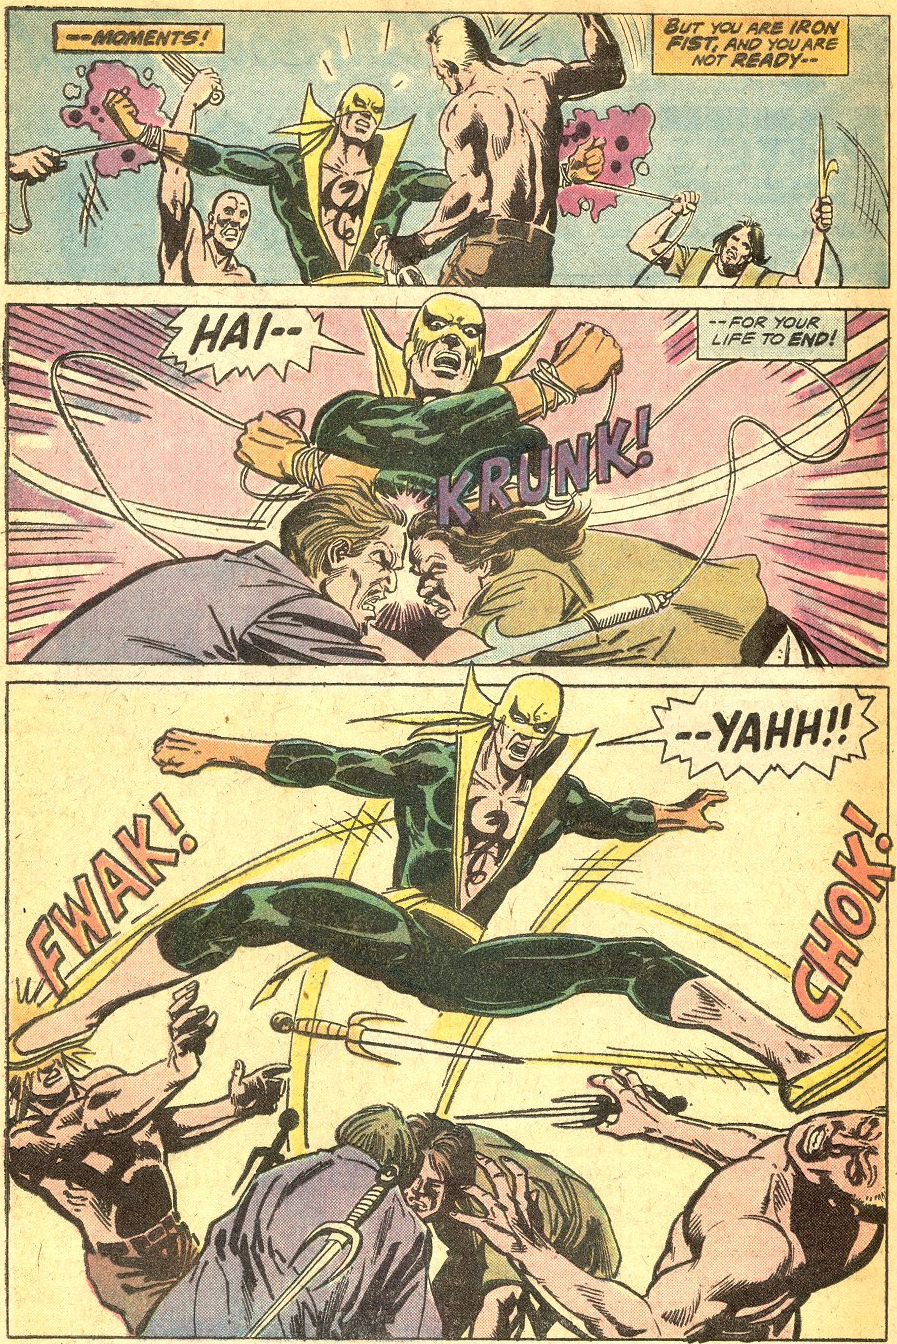 Iron Fist unleashes his martial arts skills in Marvel Premiere Vol. 1 #19 "Death cult!" (1974), Marvel Comics. Text by Doug Moench, art by Larry Hama, Neal Adams, Dick Giordano, Jan Brunner and Ray Holloway.